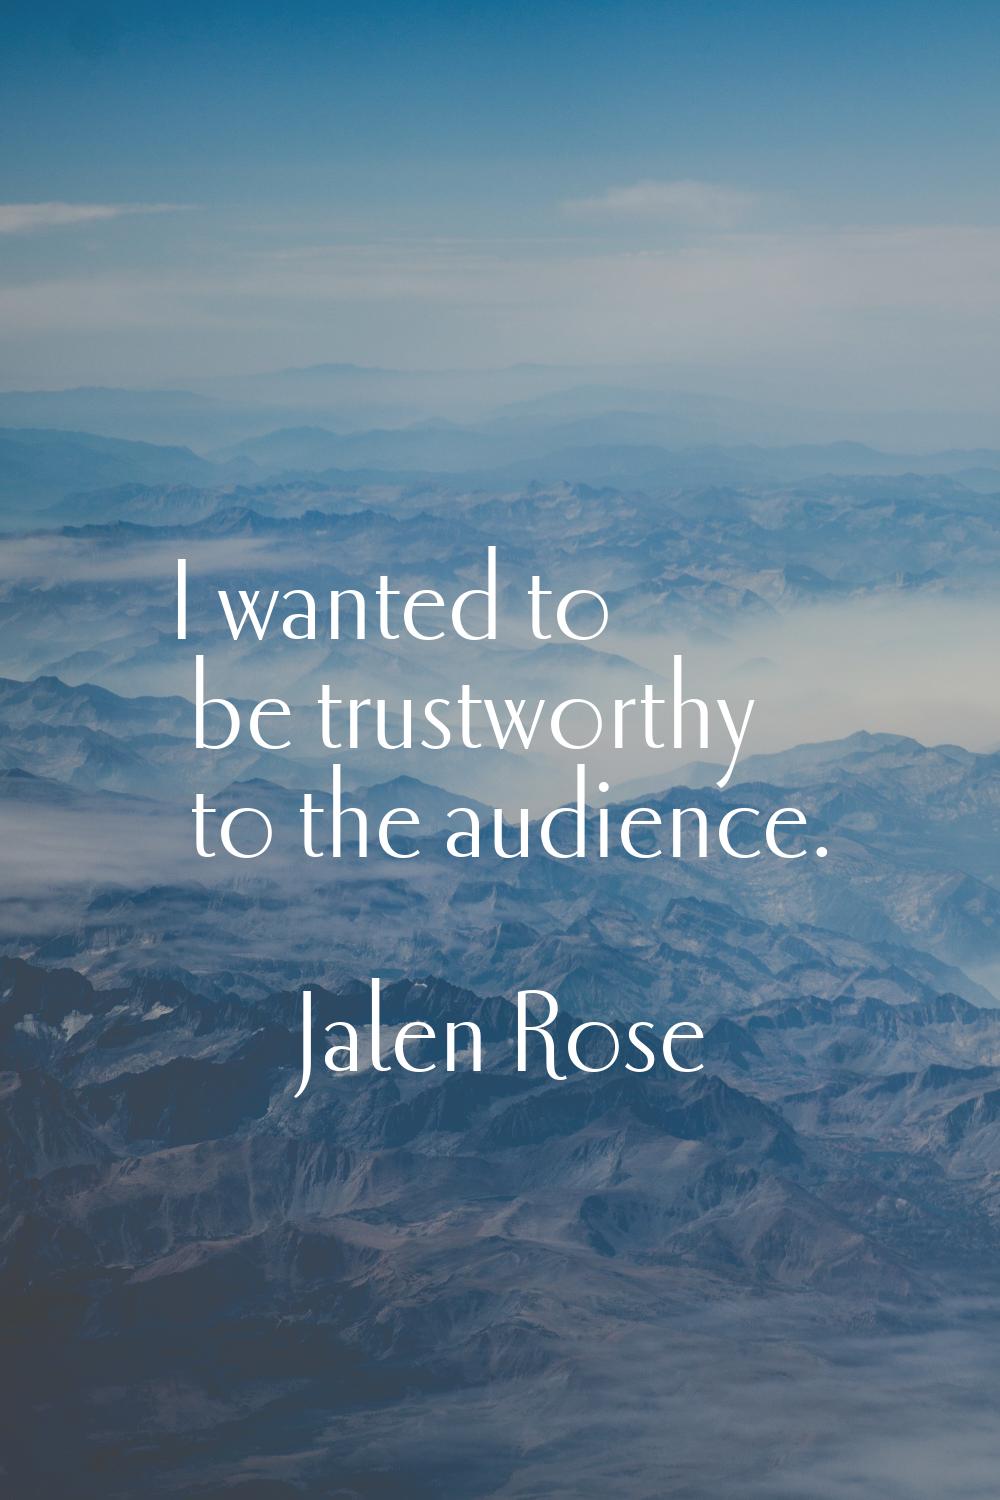 I wanted to be trustworthy to the audience.